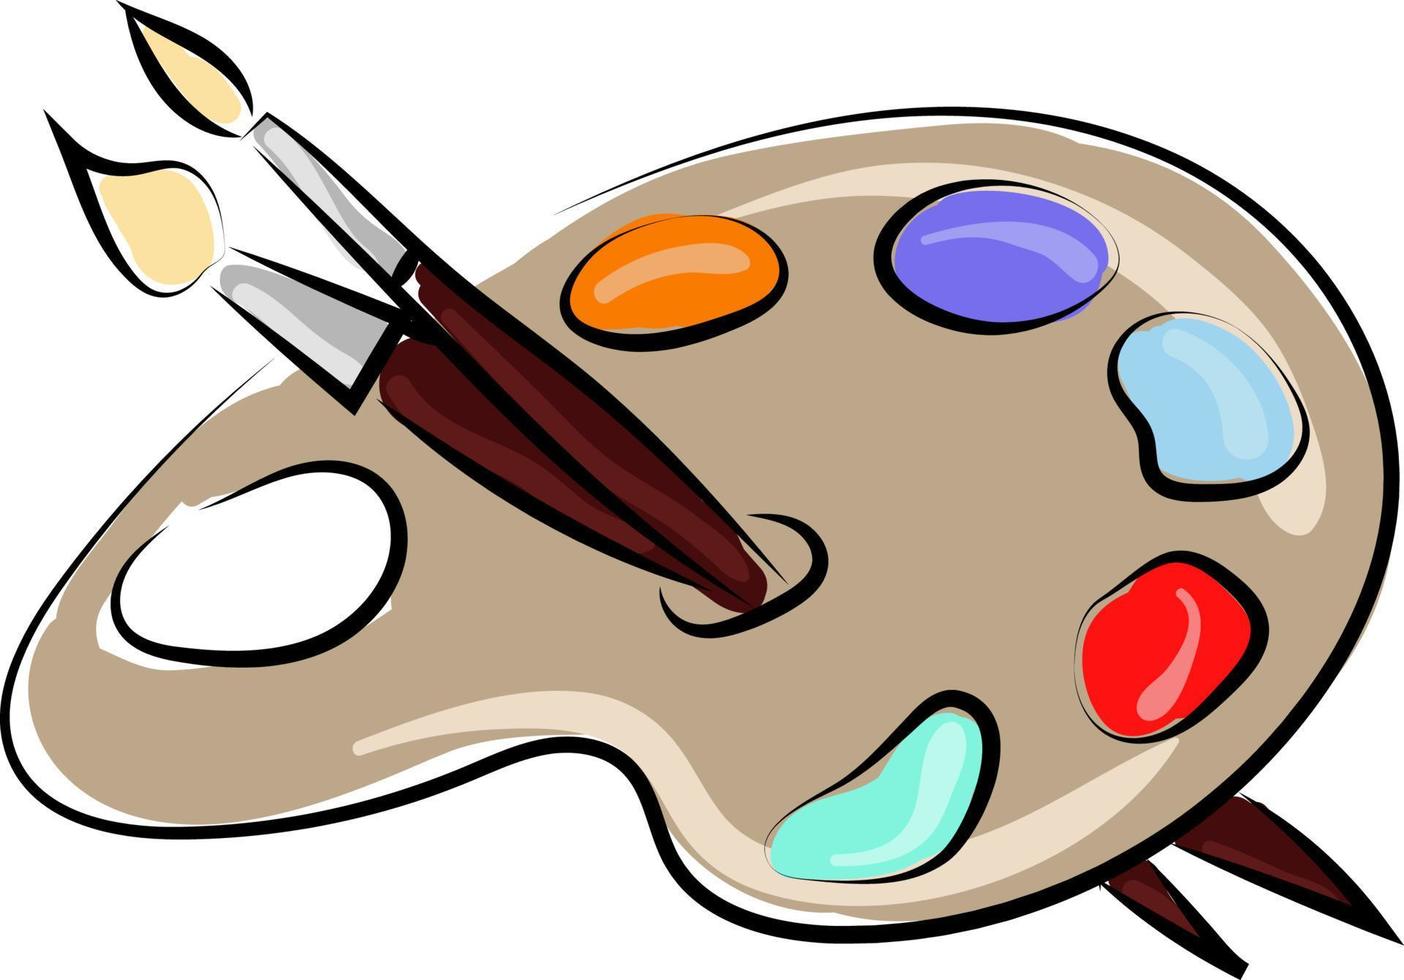 Color pallette with brushes, illustration, vector on white background